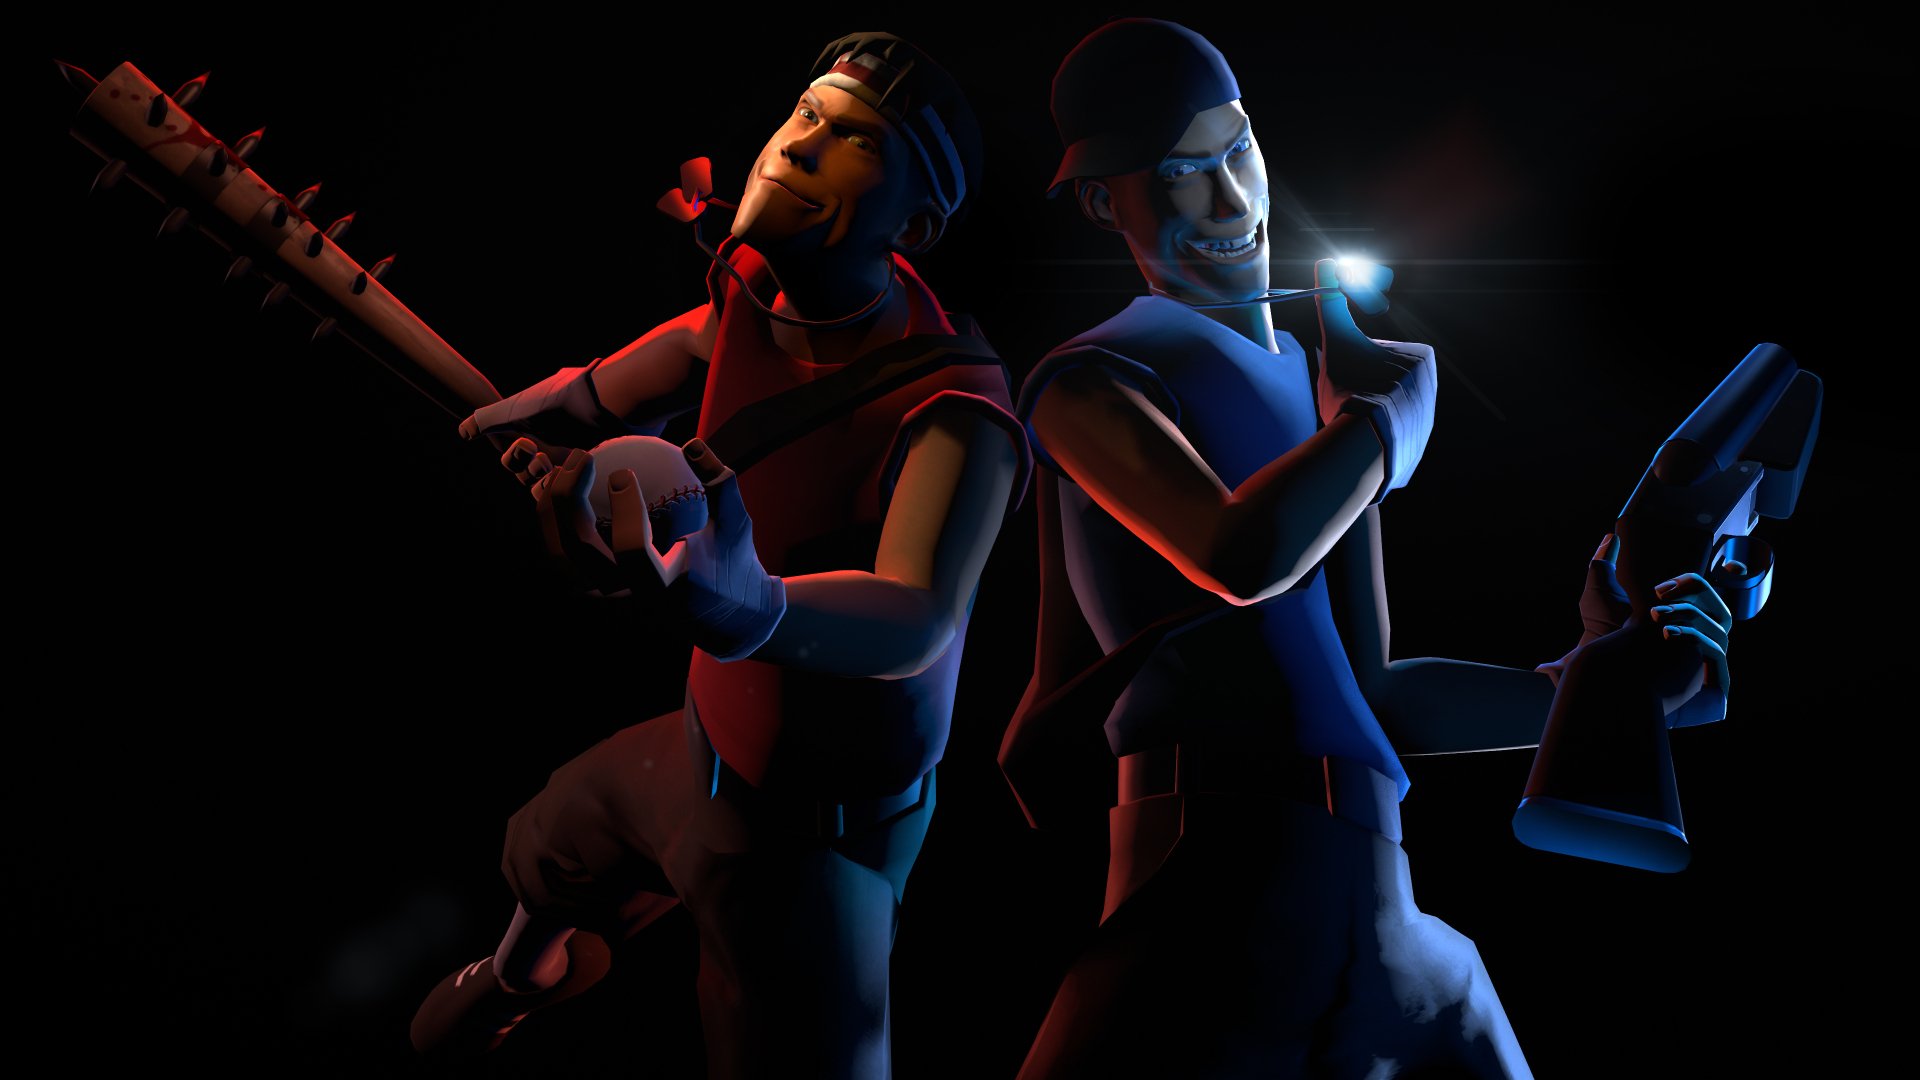 1920x1080 team fortress 2 images